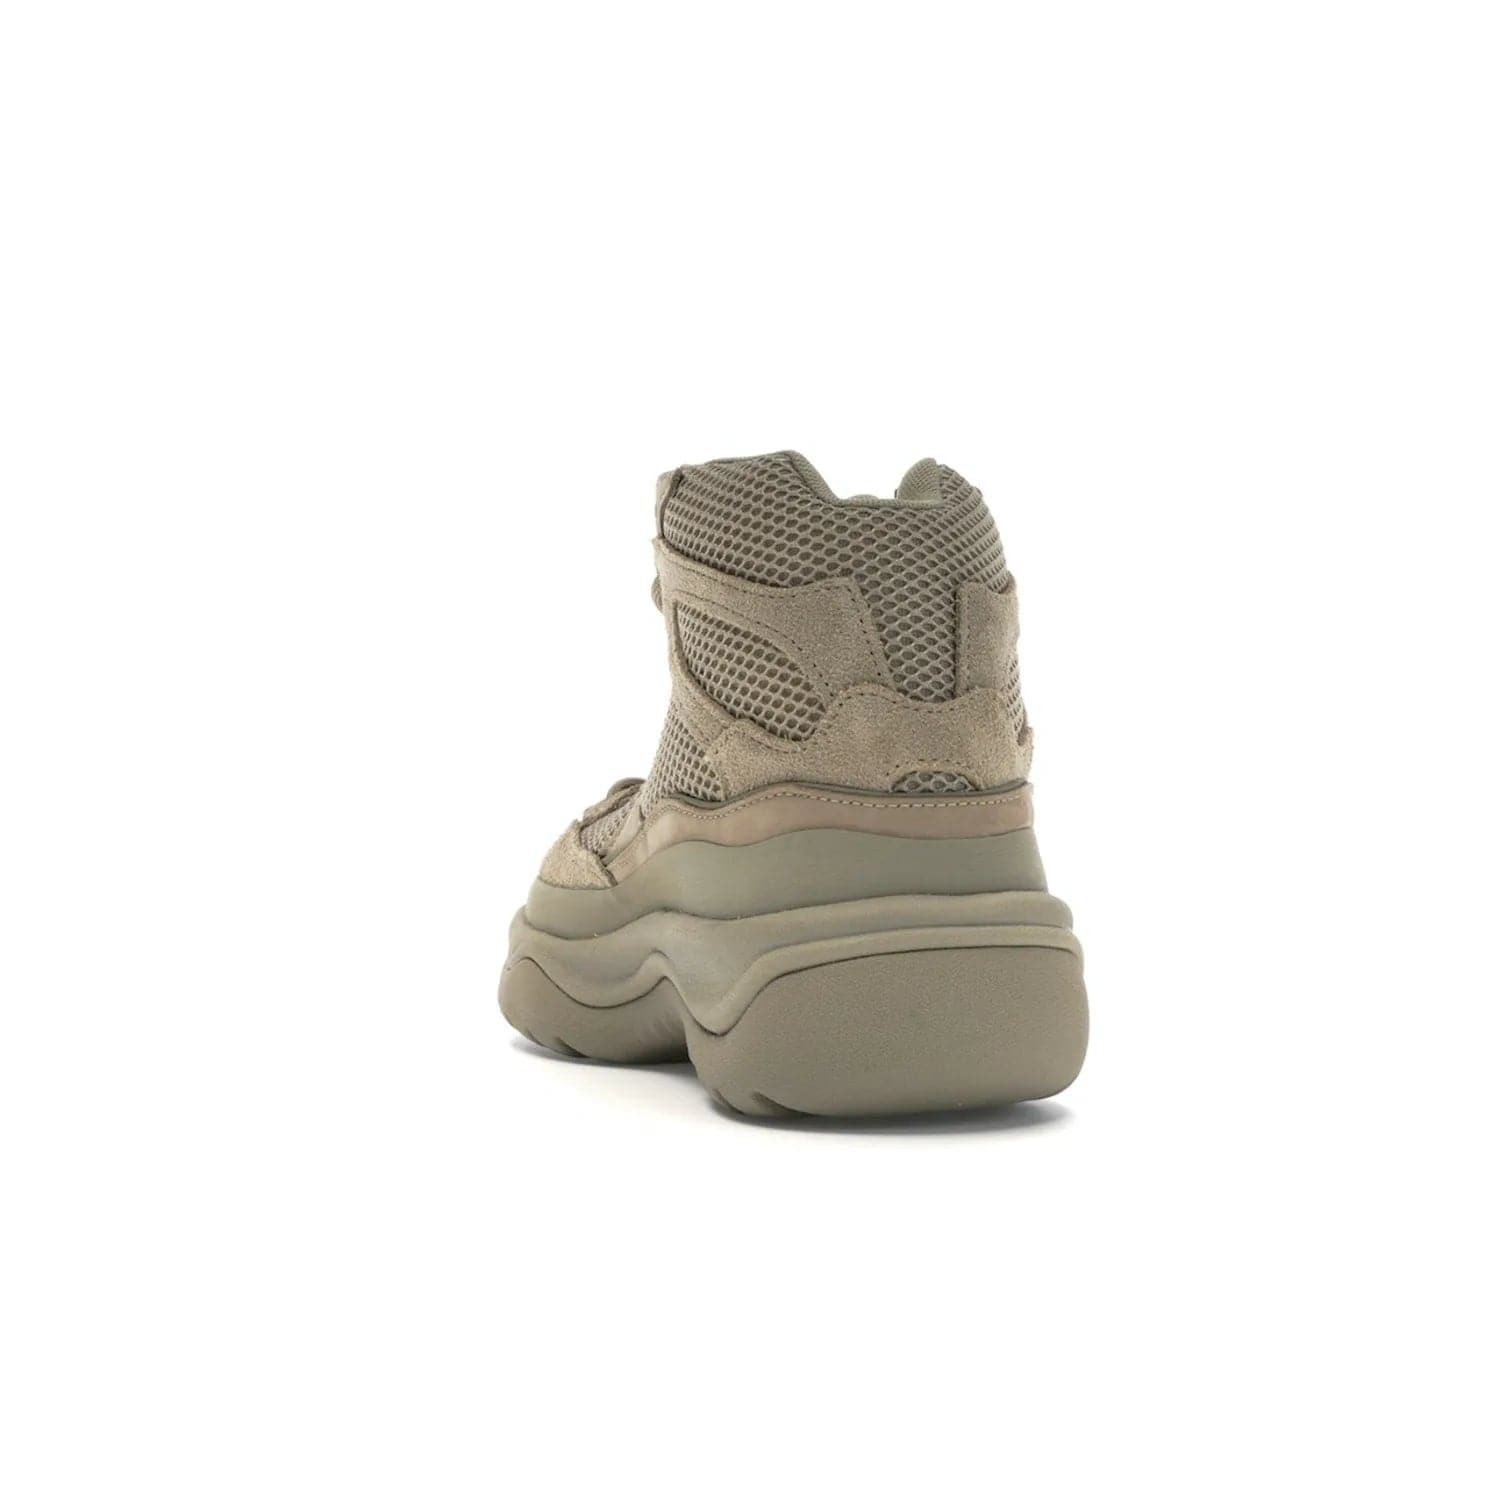 adidas Yeezy Desert Boot Rock - Image 26 - Only at www.BallersClubKickz.com - #
This season, make a fashion statement with the adidas Yeezy Desert Boot Rock. Nubuck and suede upper offers tonal style while the grooved sole provides traction and stability. Get yours in April 2019.